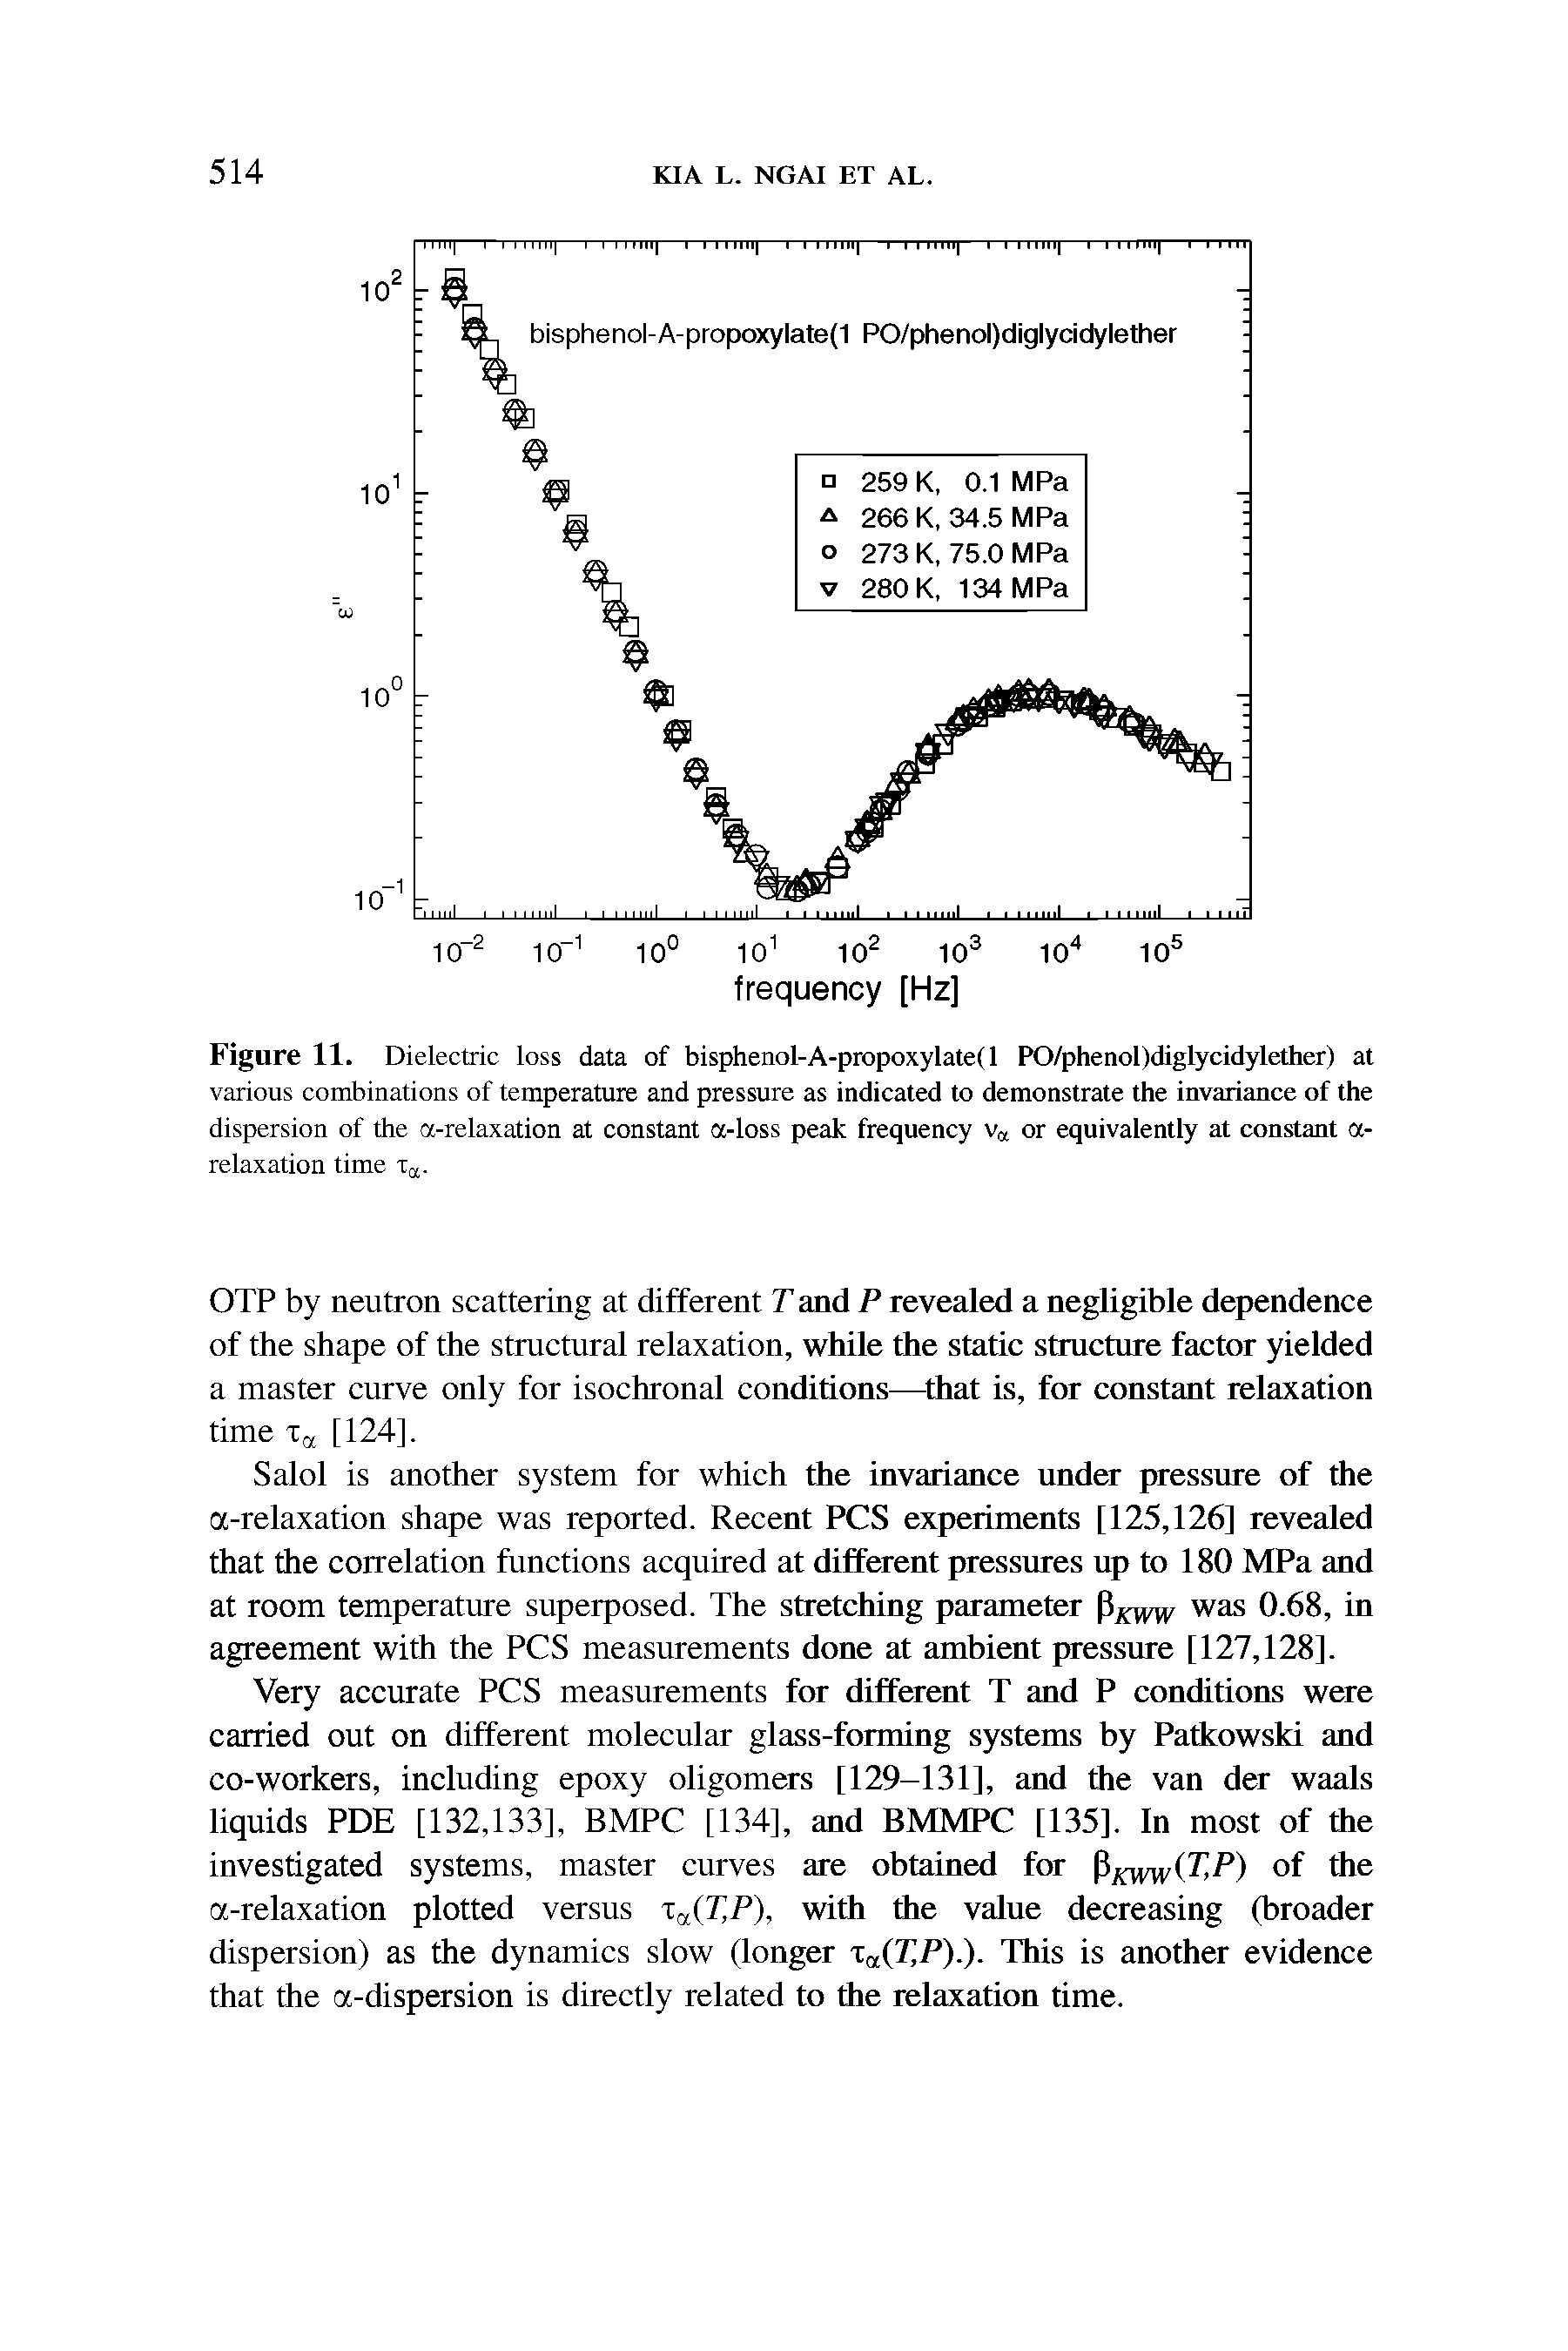 Figure 11. Dielectric loss data of bisphenol-A-propoxylate( 1 PO/phenol)diglycidylether) at various combinations of temperature and pressure as indicated to demonstrate the invariance of the dispersion of the a-relaxation at constant a-loss peak frequency va or equivalently at constant a-relaxation time t7.